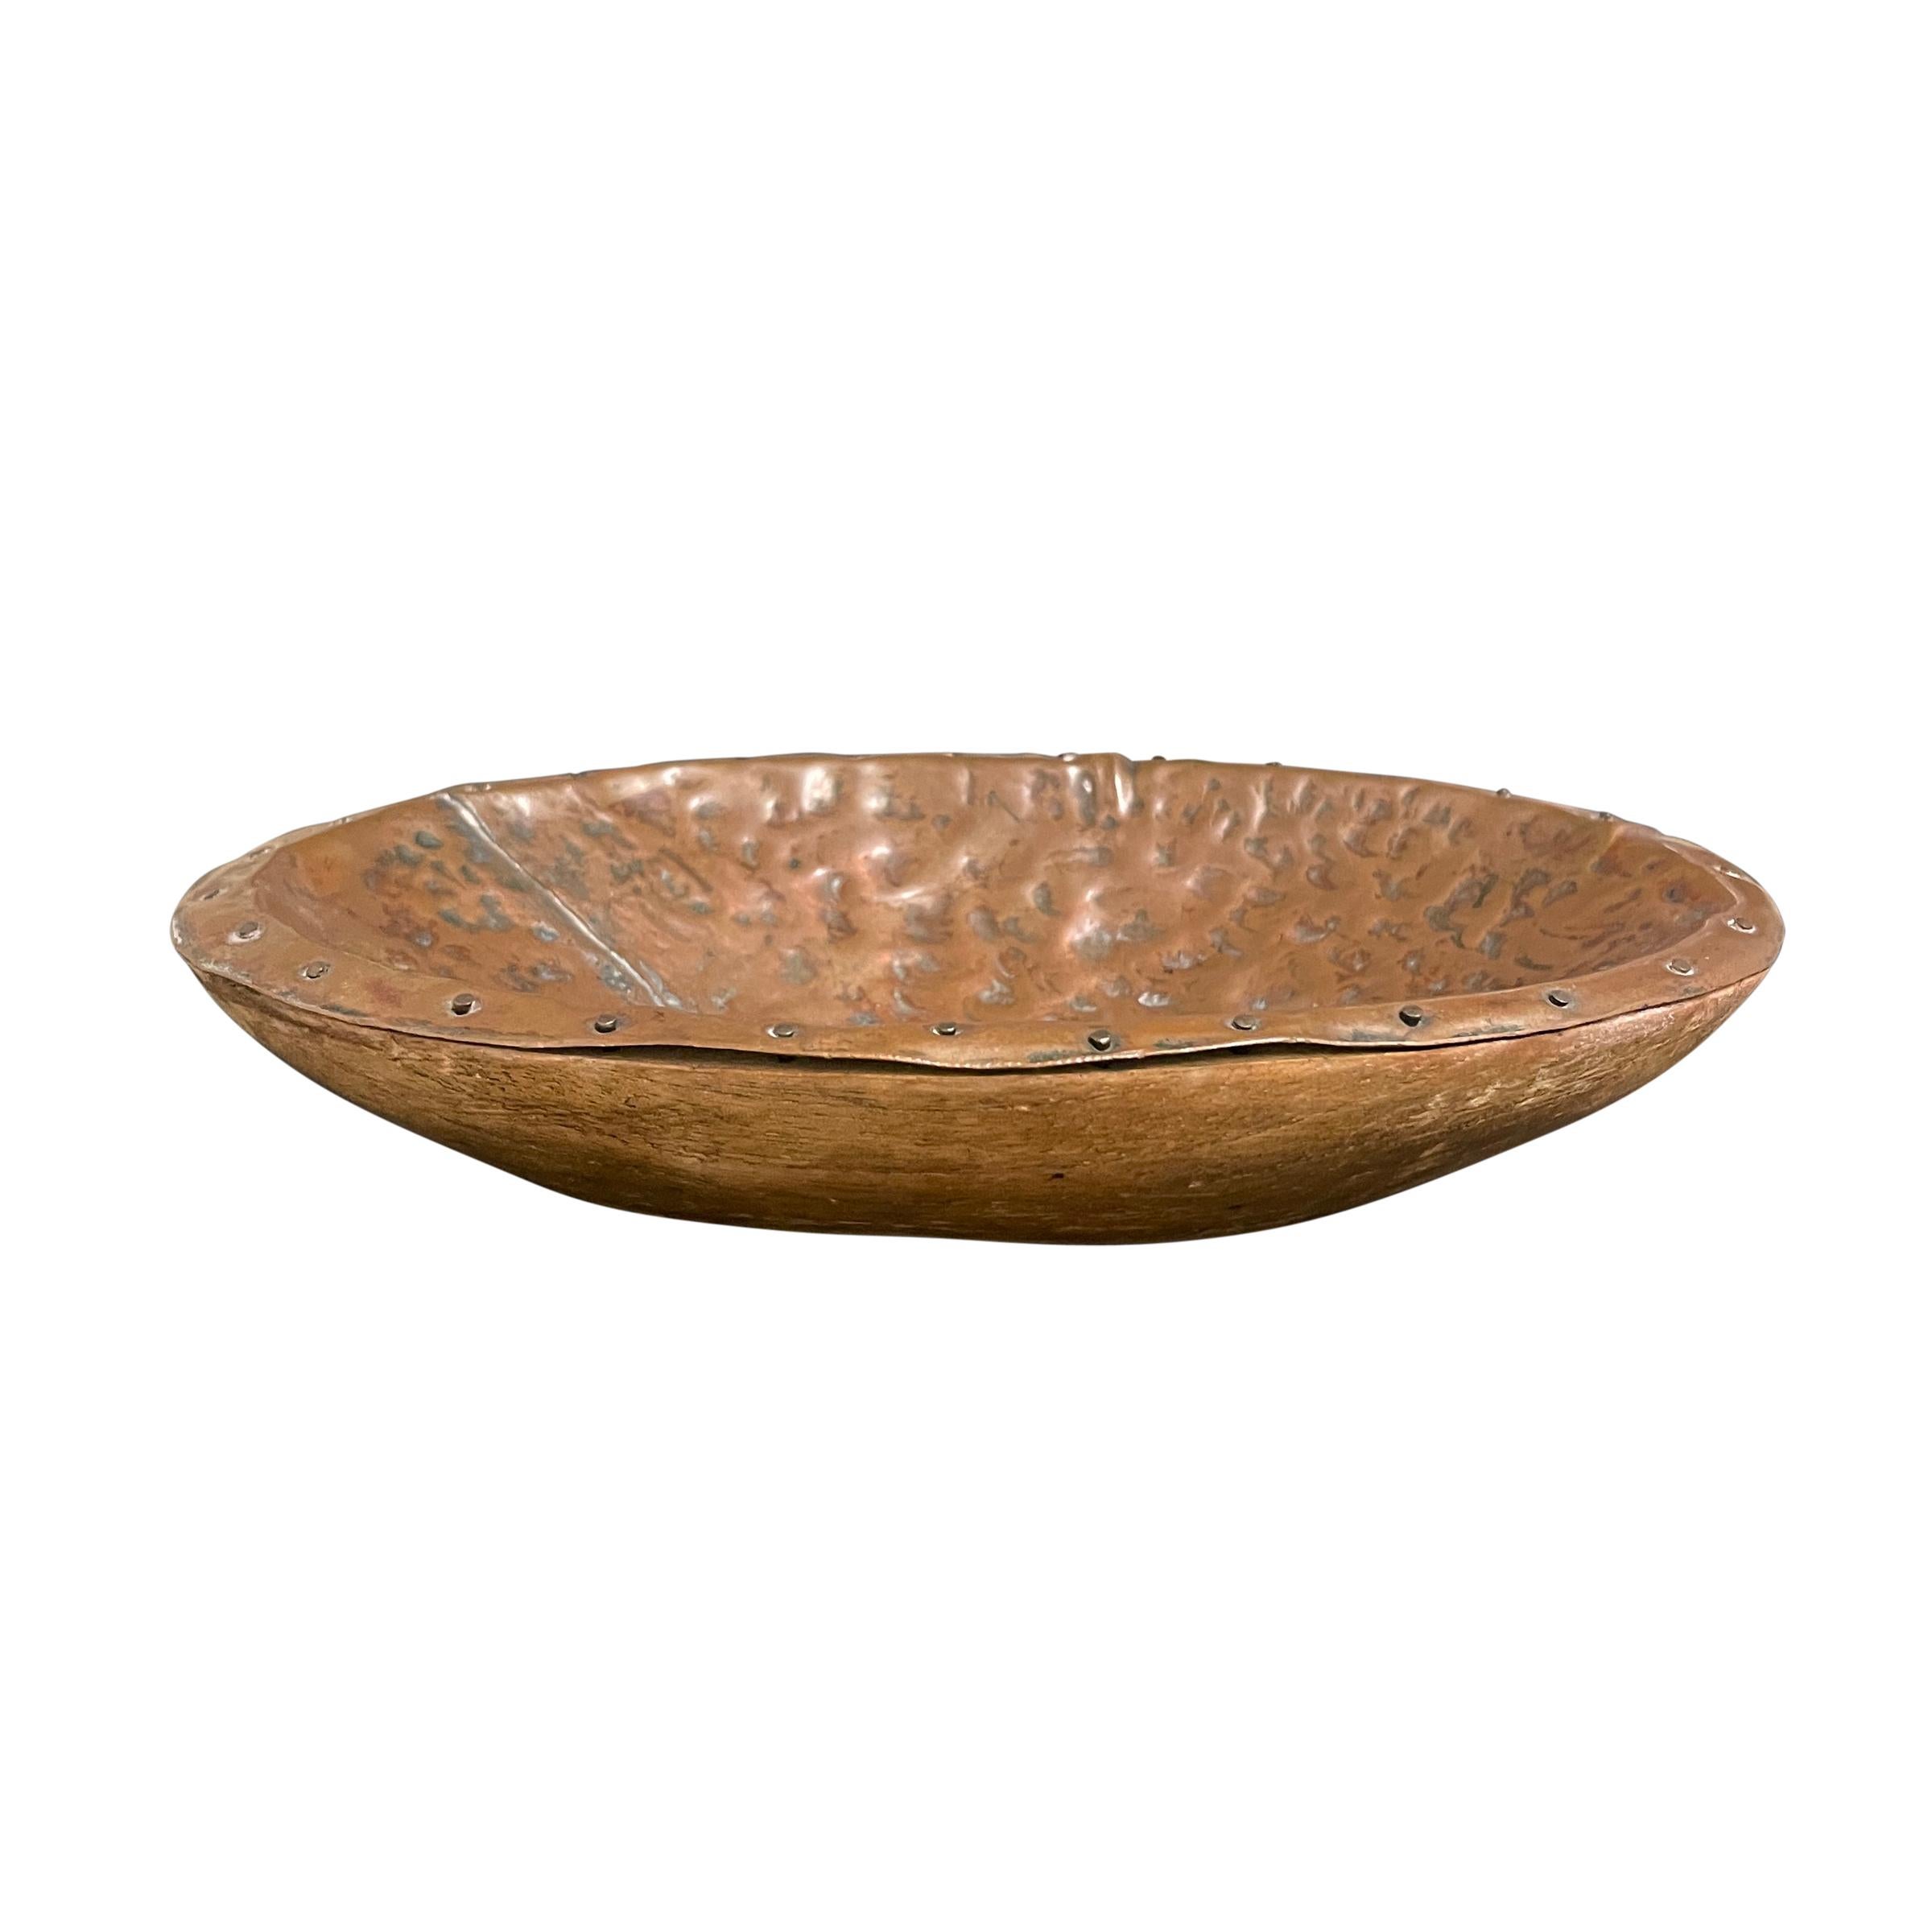 20th Century American Hammered Copper Bowl In Good Condition For Sale In Chicago, IL